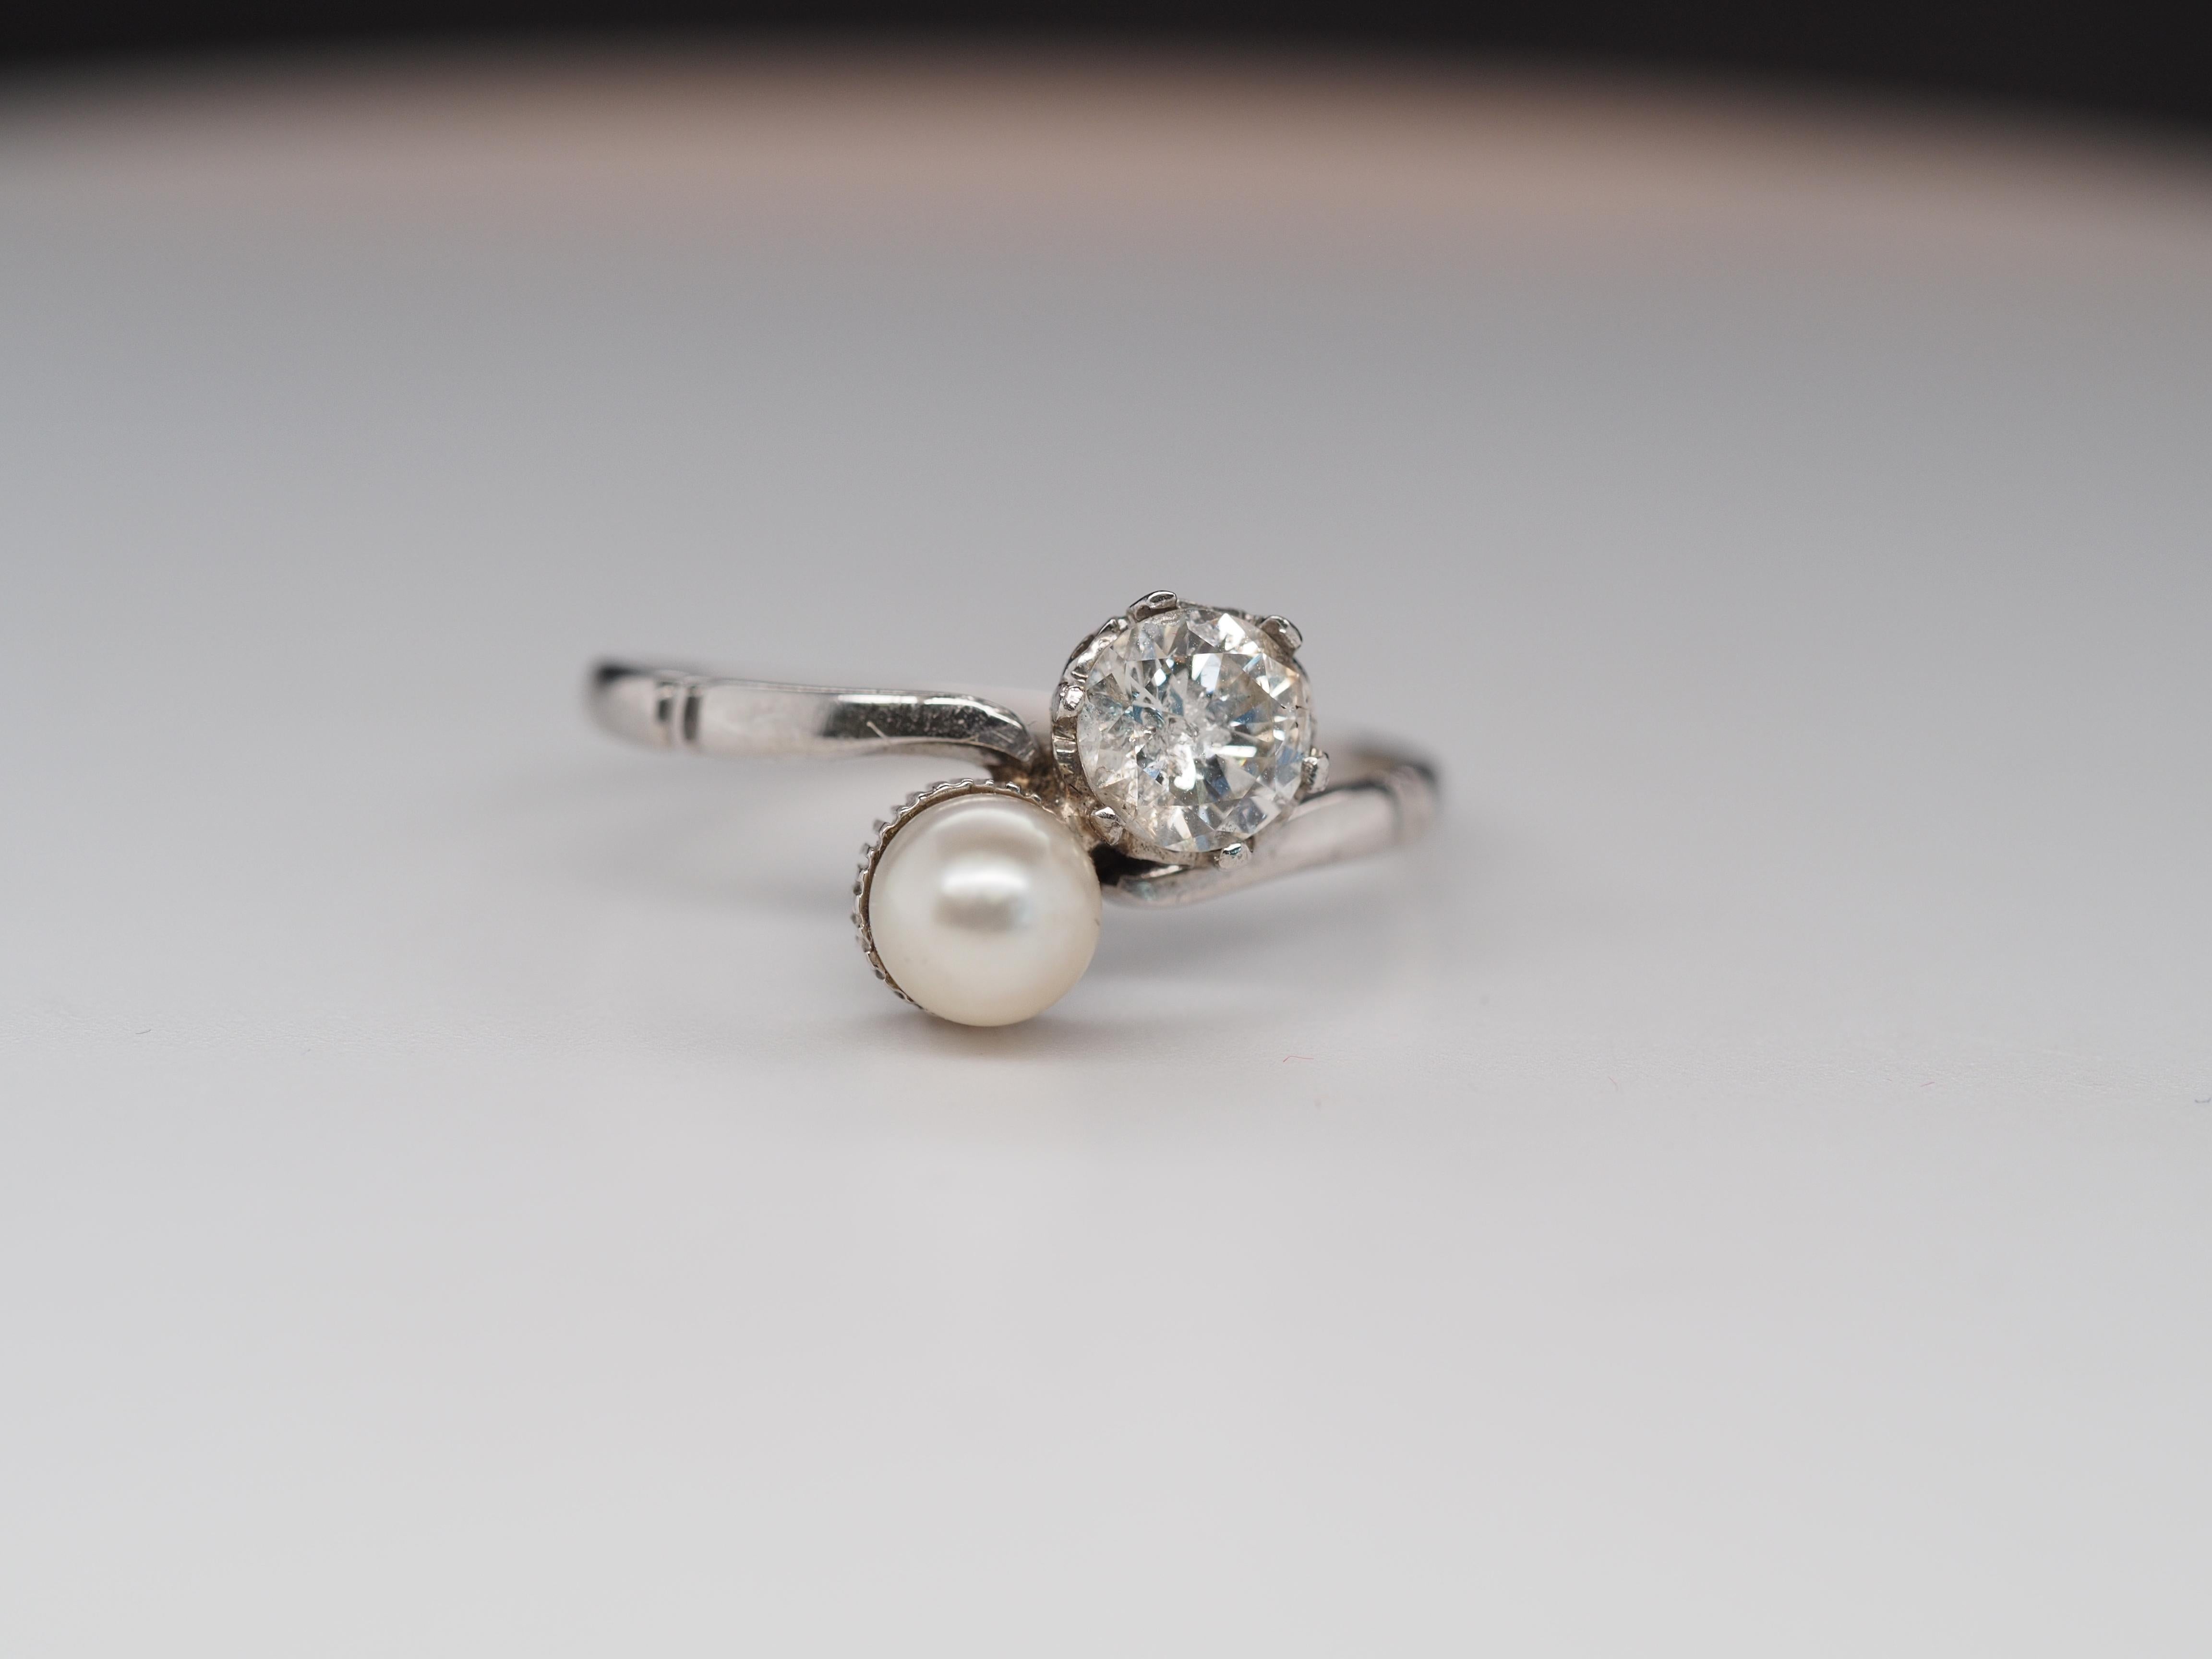 Item Details:
Ring Size: 7.5
Metal Type: Platinum [Hallmarked, and Tested]
Weight: 2.7 grams
Diamond Details: Transitional Round, .40CT, I2 imperfect, G Color
Pearl Details: natural, 4mm, ovals, pink/white hue
Band Width: 1.6mm
Condition: Excellent